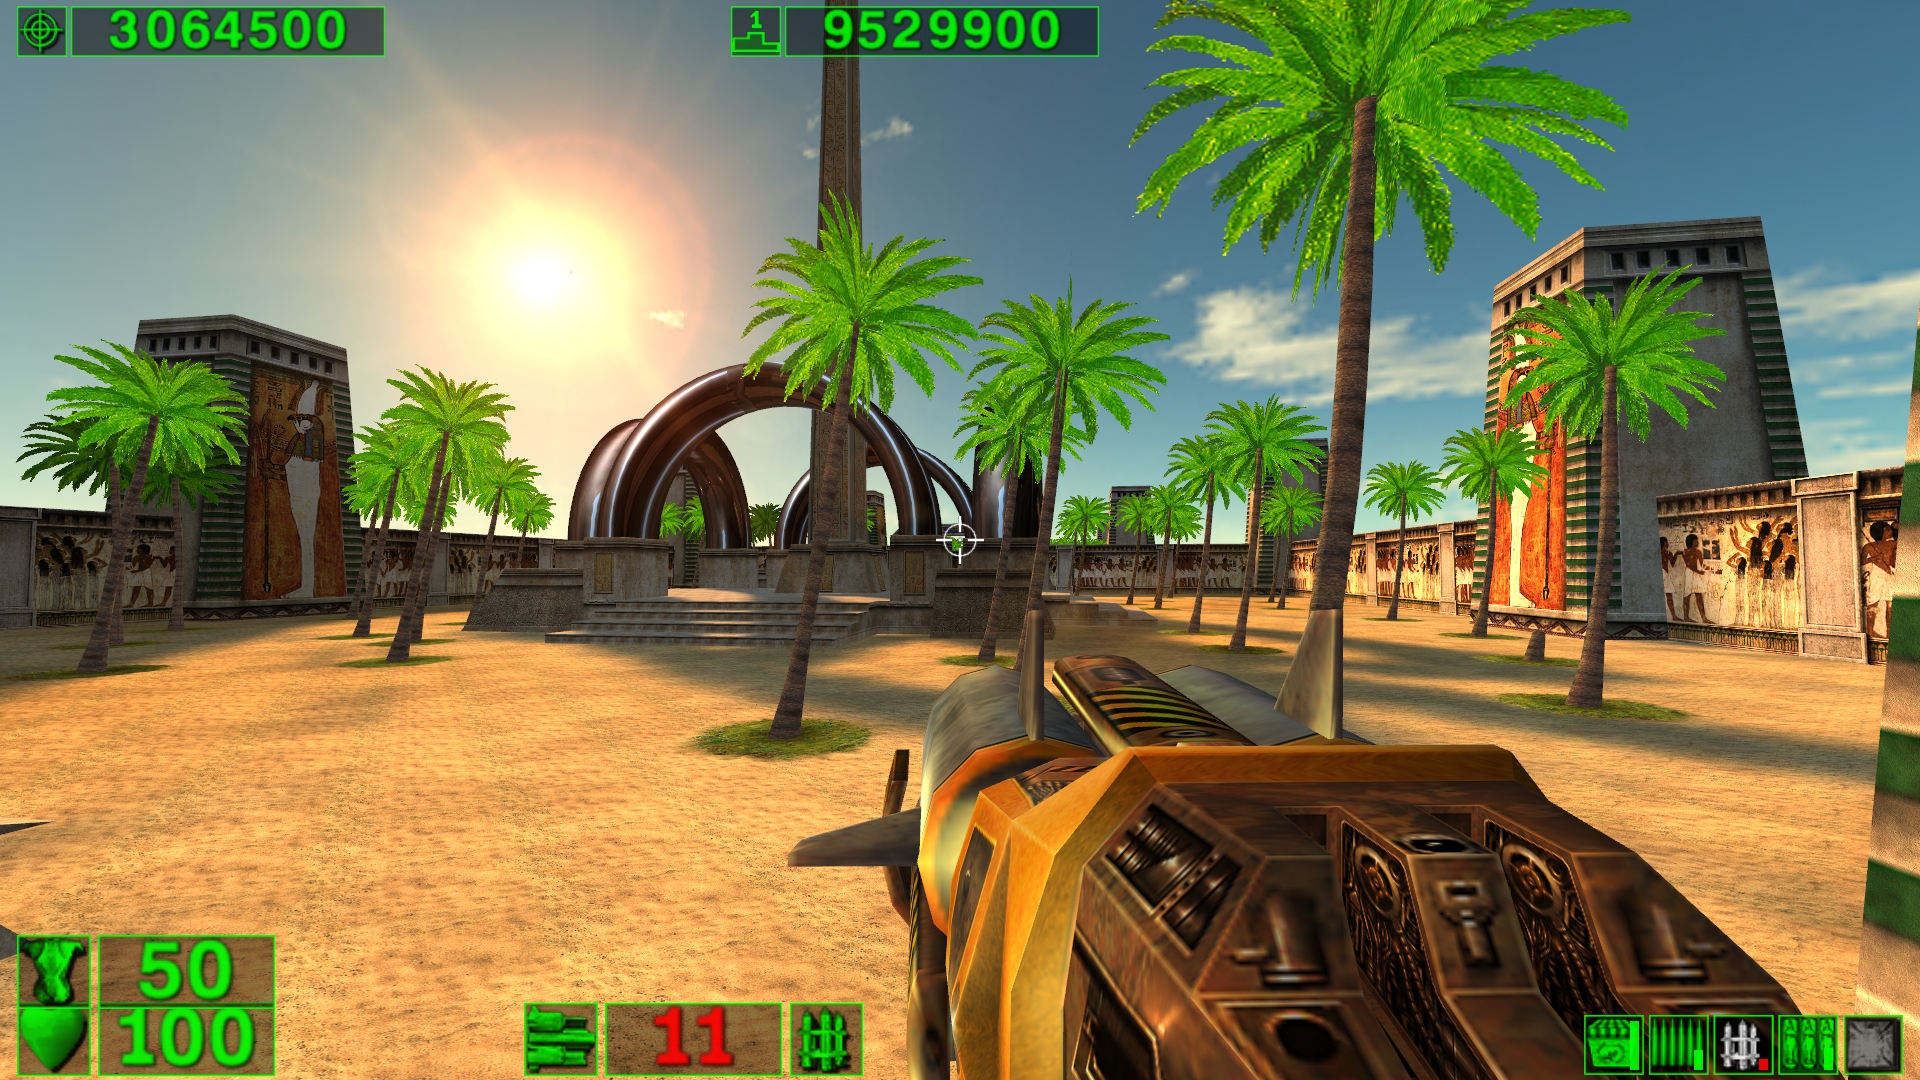 Serious sam first encounter download for mac